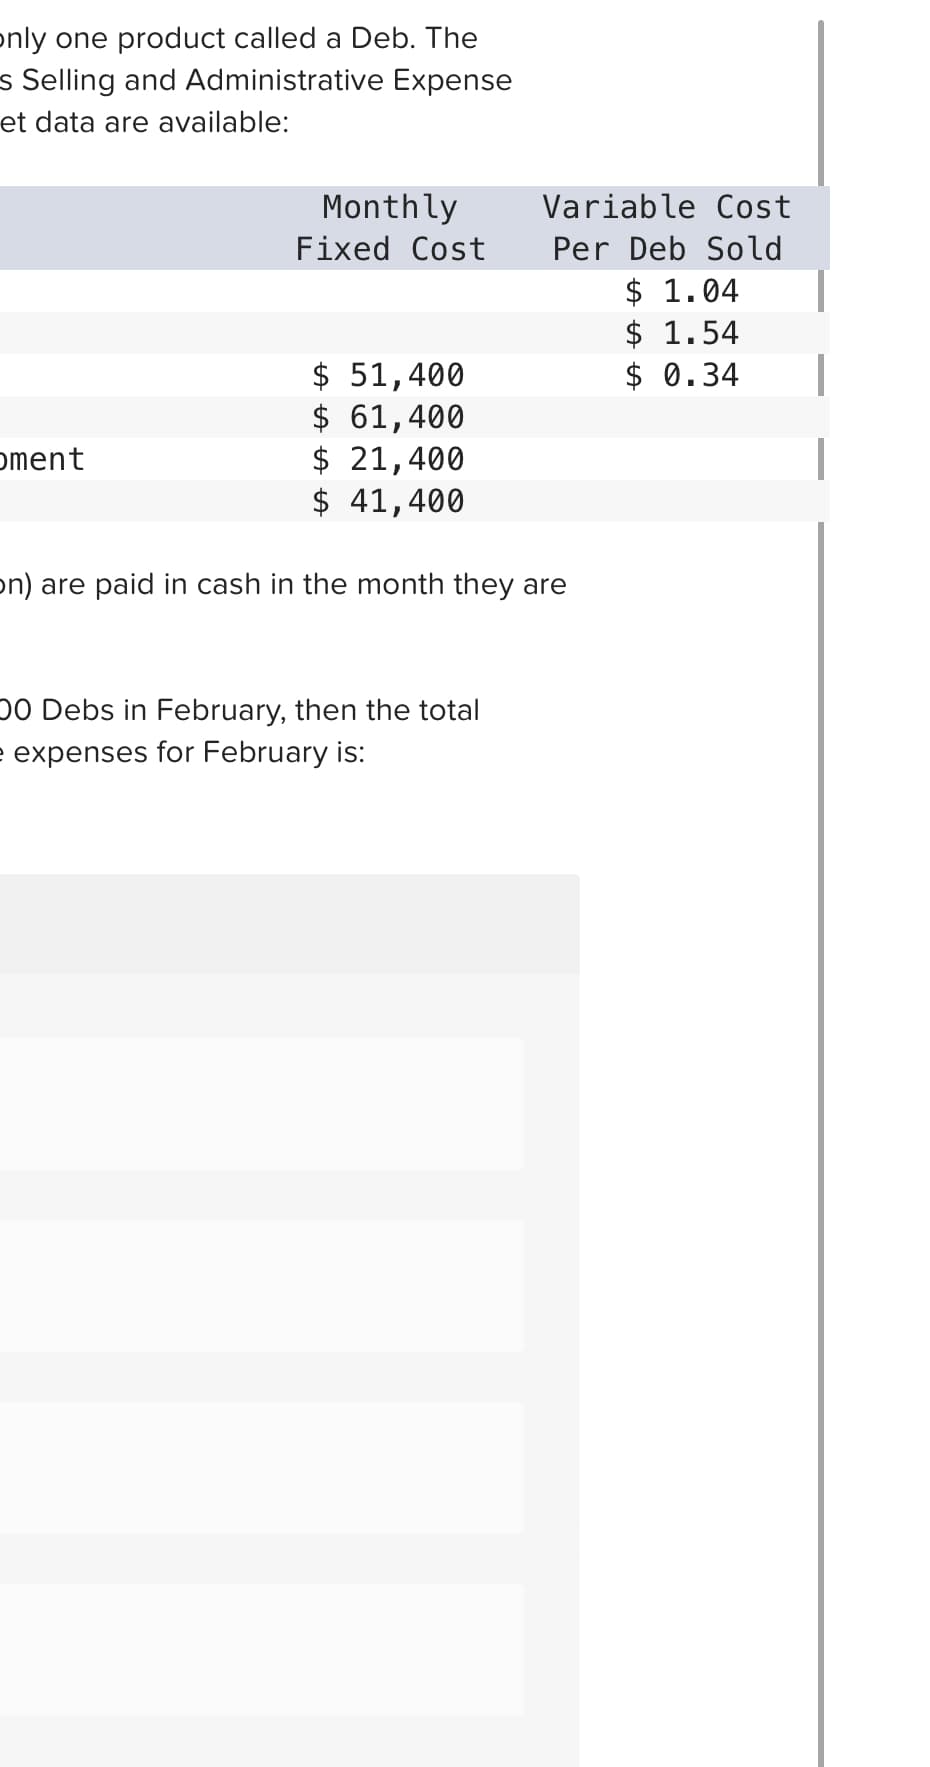 only one product called a Deb. The
s Selling and Administrative Expense
et data are available:
oment
Monthly
Fixed Cost
$ 51,400
$ 61,400
$ 21,400
$ 41,400
Variable Cost
Per Deb Sold
on) are paid in cash in the month they are
00 Debs in February, then the total
e expenses for February is:
$ 1.04
$ 1.54
$ 0.34